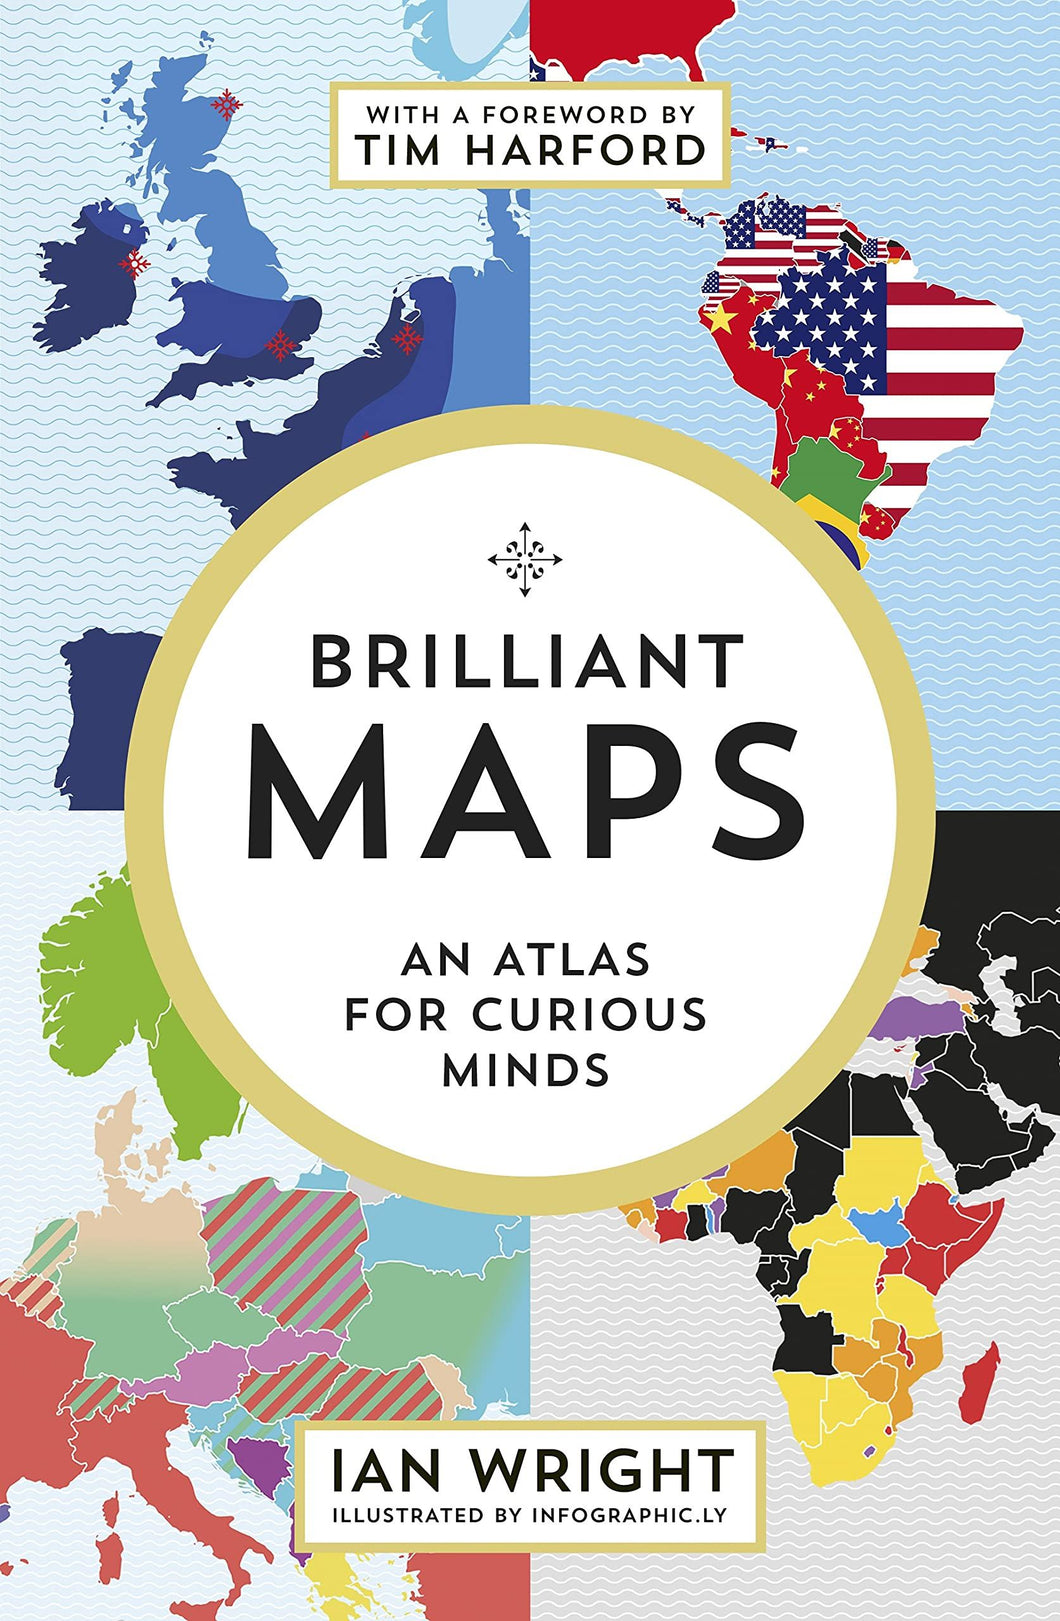 Brilliant maps: an atlas for the curious minds book